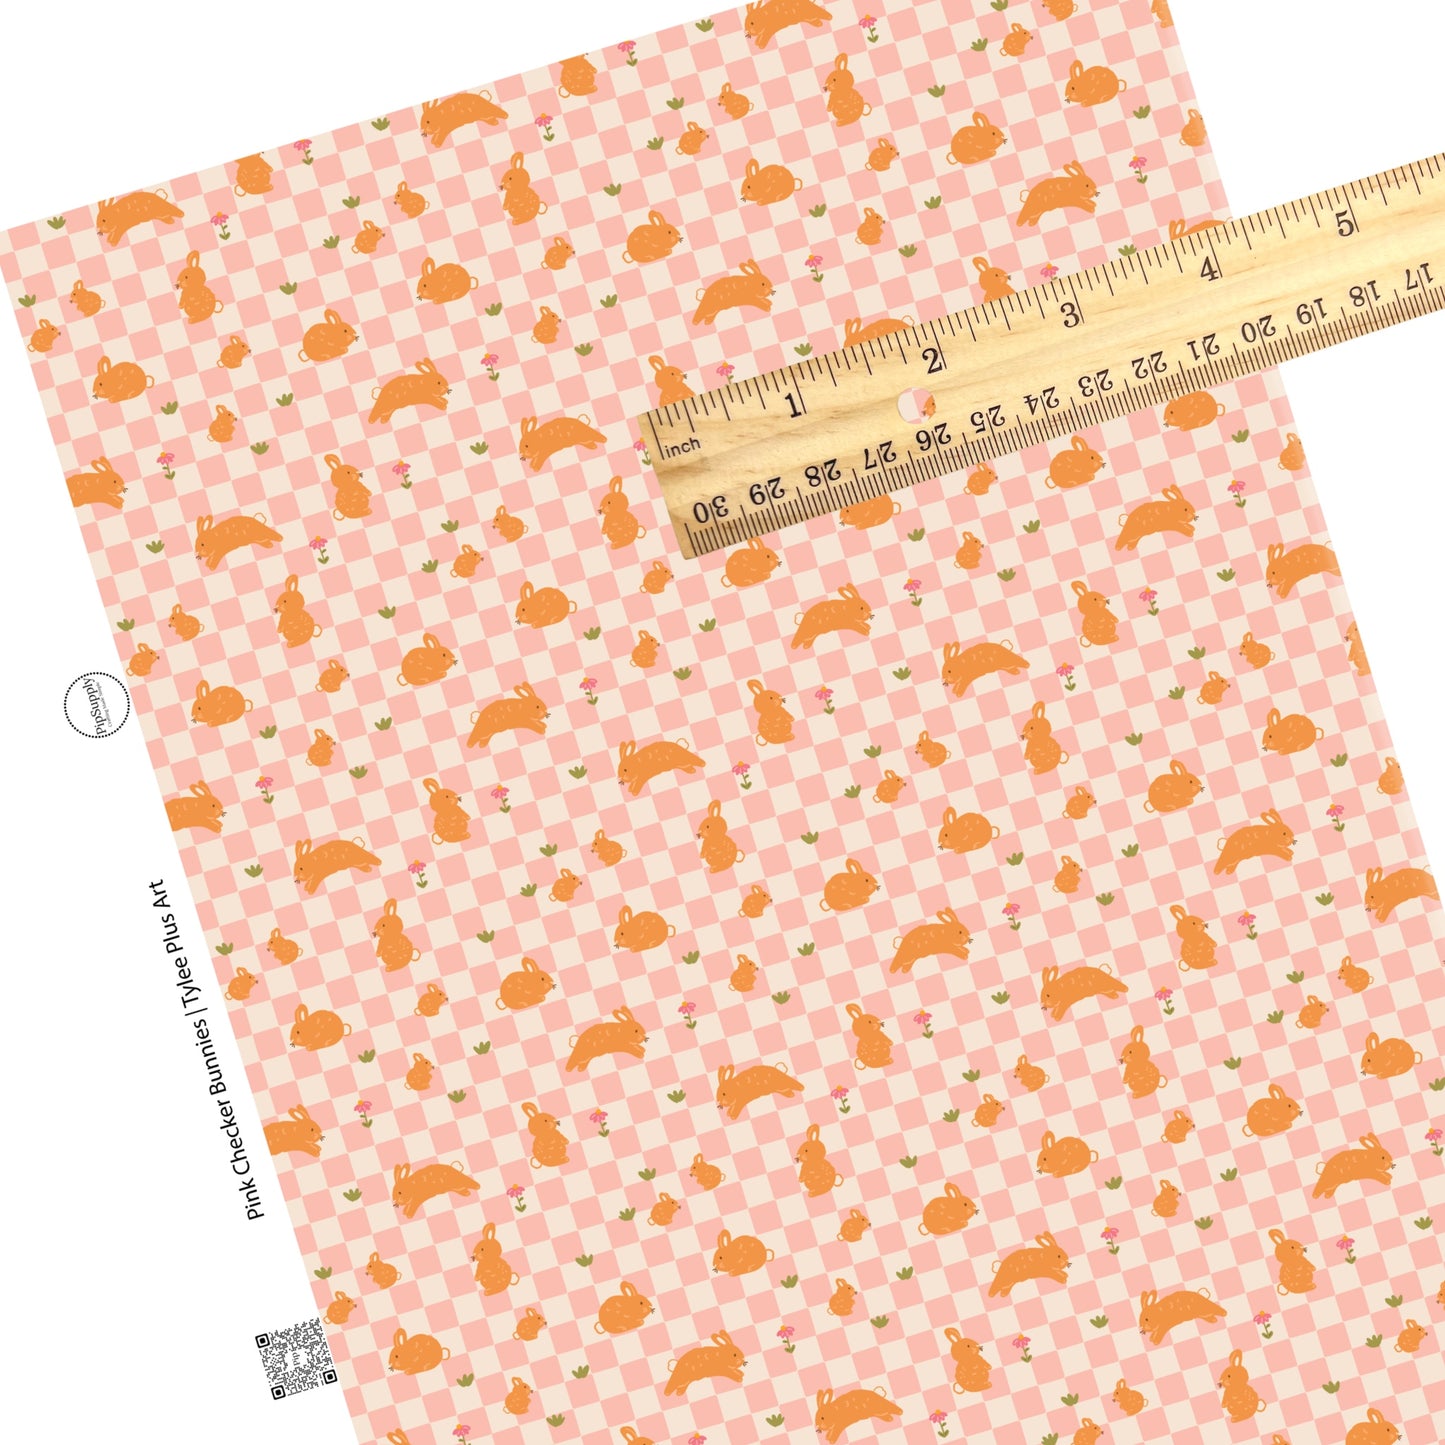 These pastel checkered pattern faux leather sheets contain the following design elements: bunnies and tiny flowers on light pink and cream checkered pattern. Our CPSIA compliant faux leather sheets or rolls can be used for all types of crafting projects. 